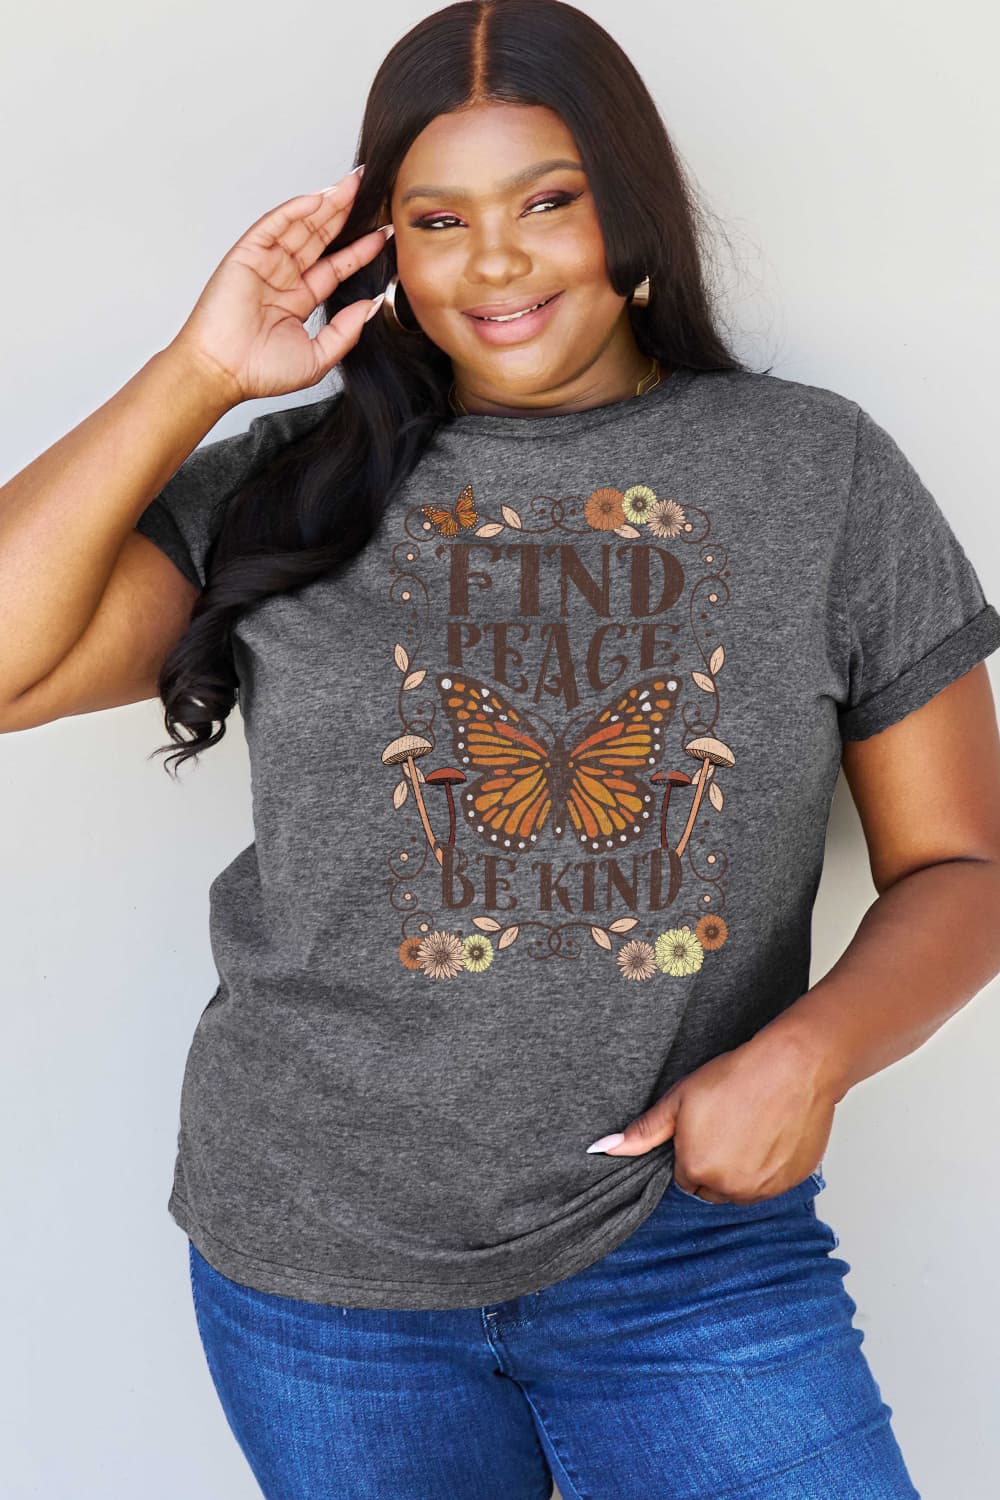 Simply Love Full Size FIND PEACE BE KIND Graphic Cotton T-Shirt